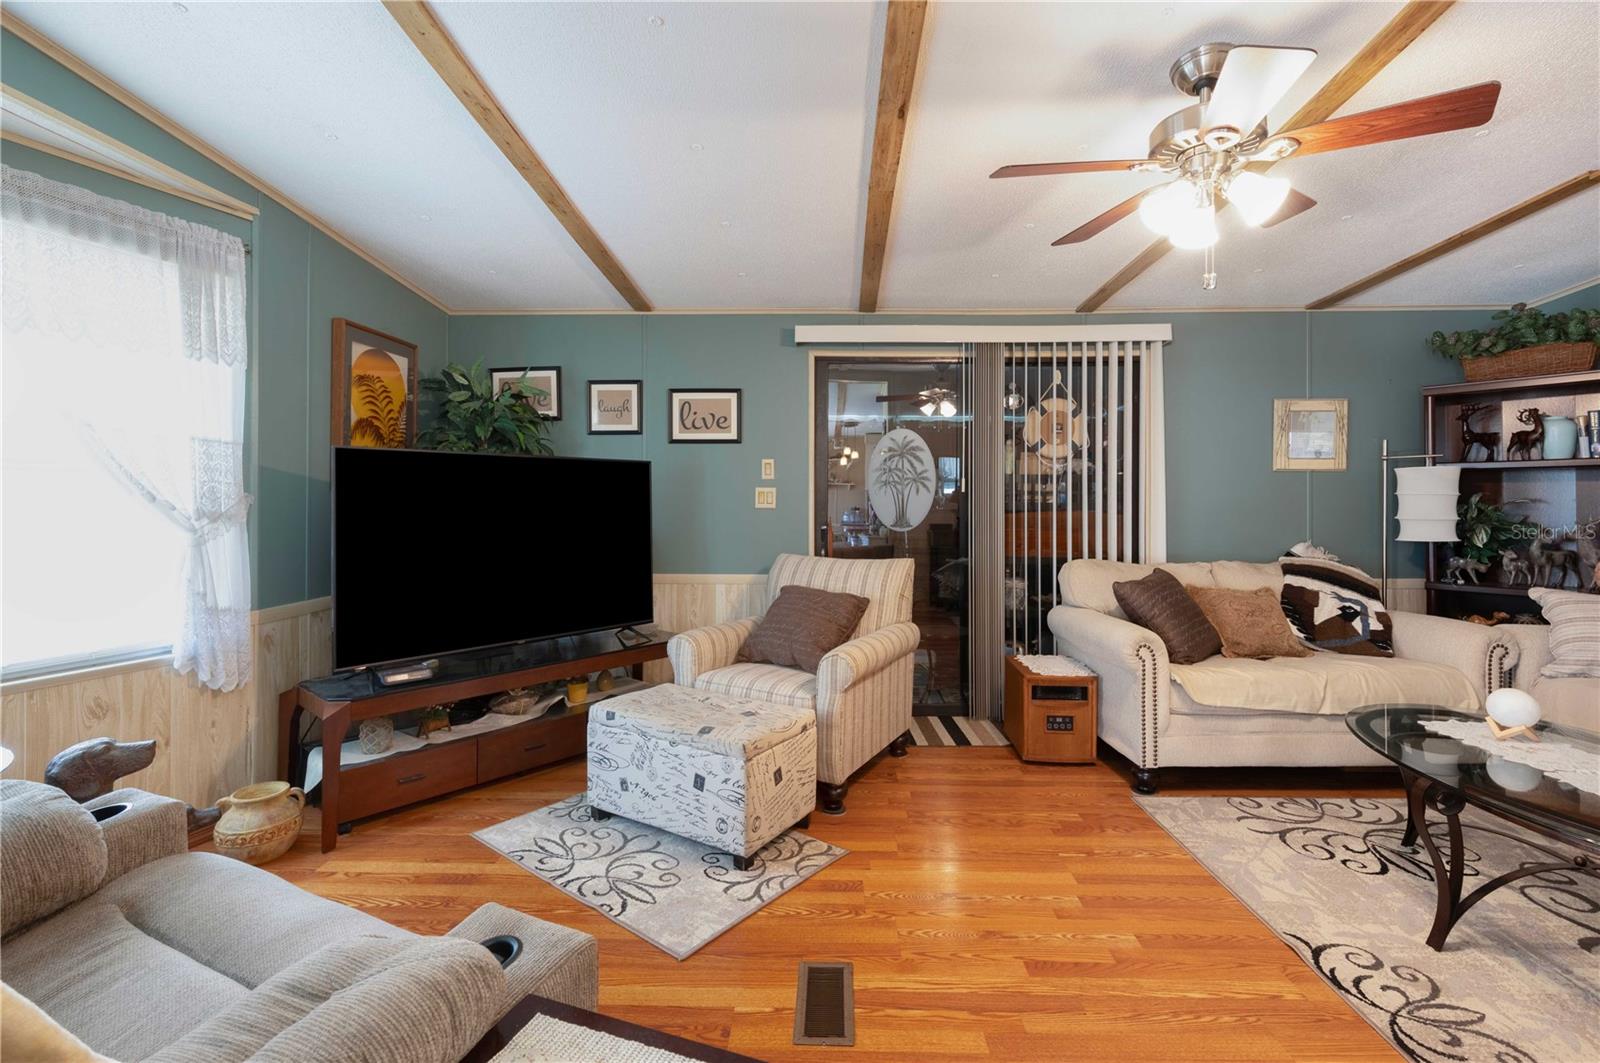 Living room has laminate flooring, ceiling fan, and nicely painted.